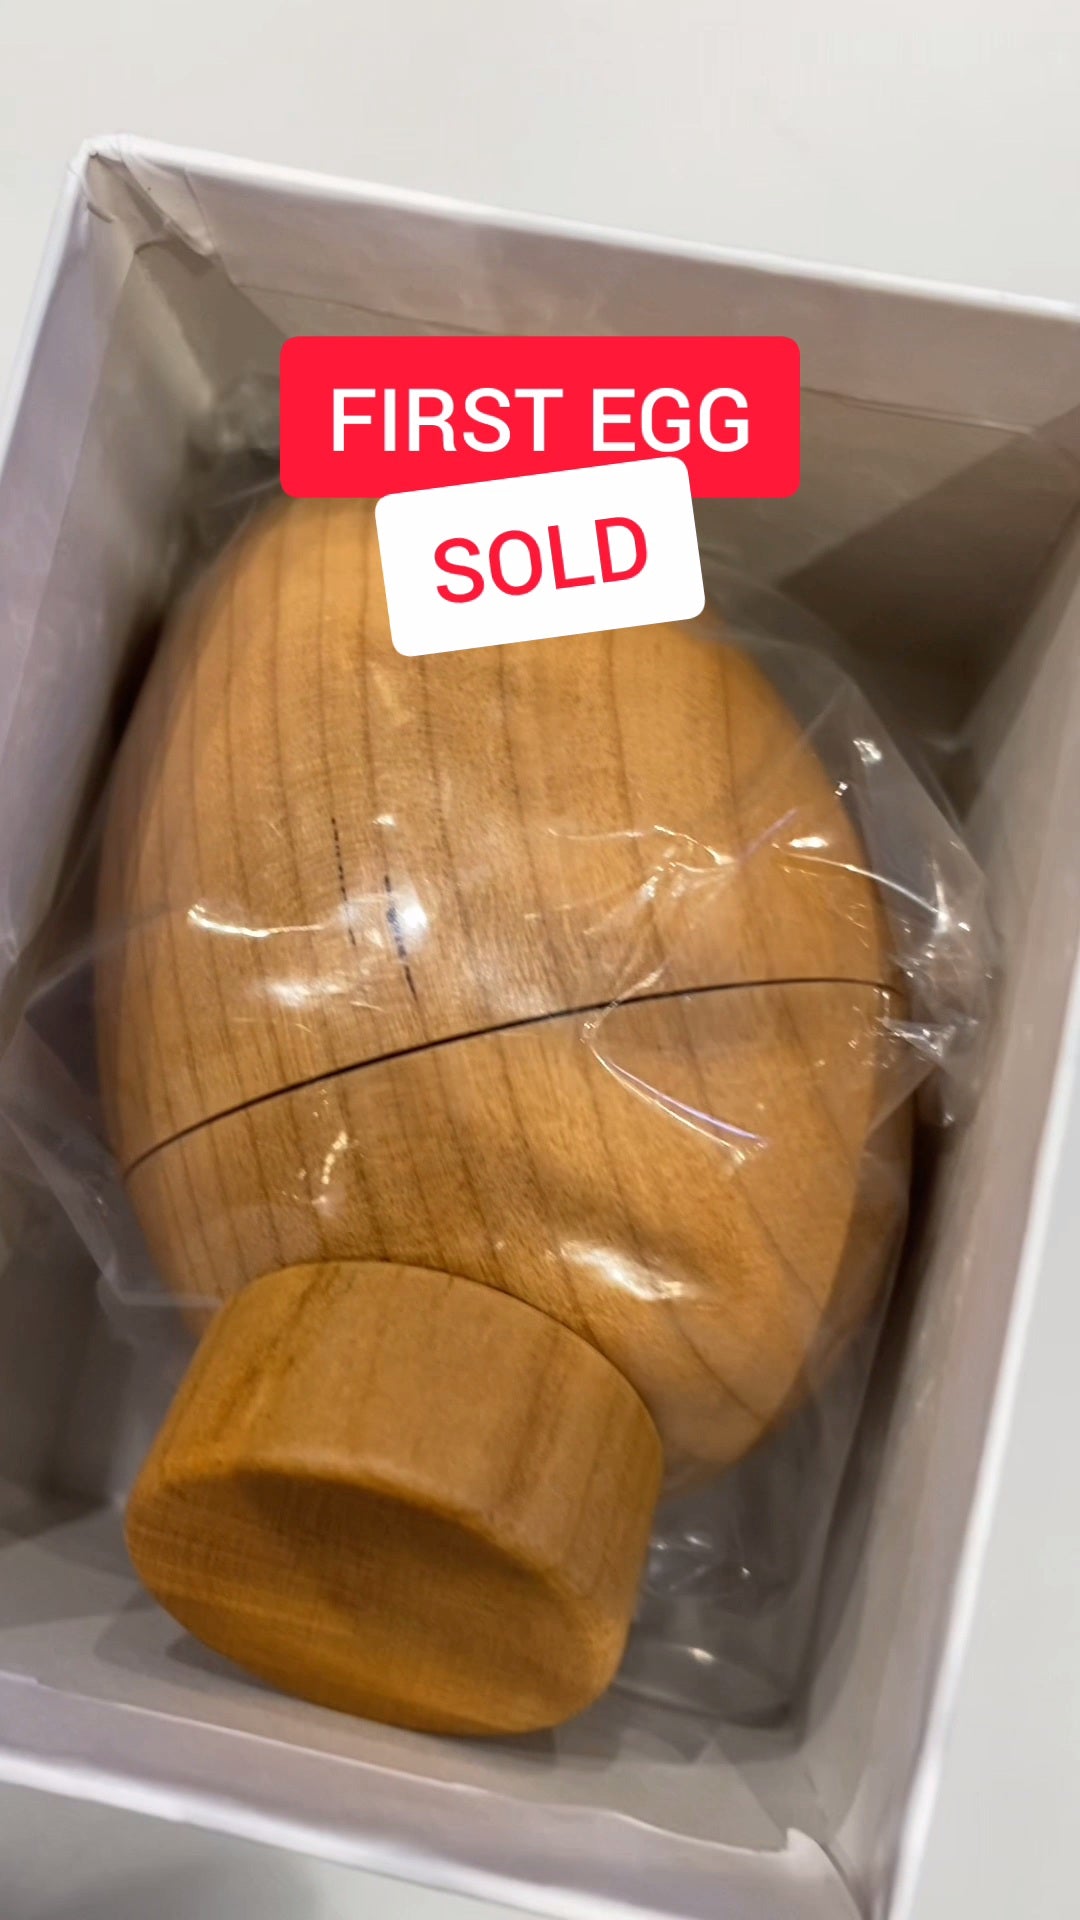 Our first egg sold!